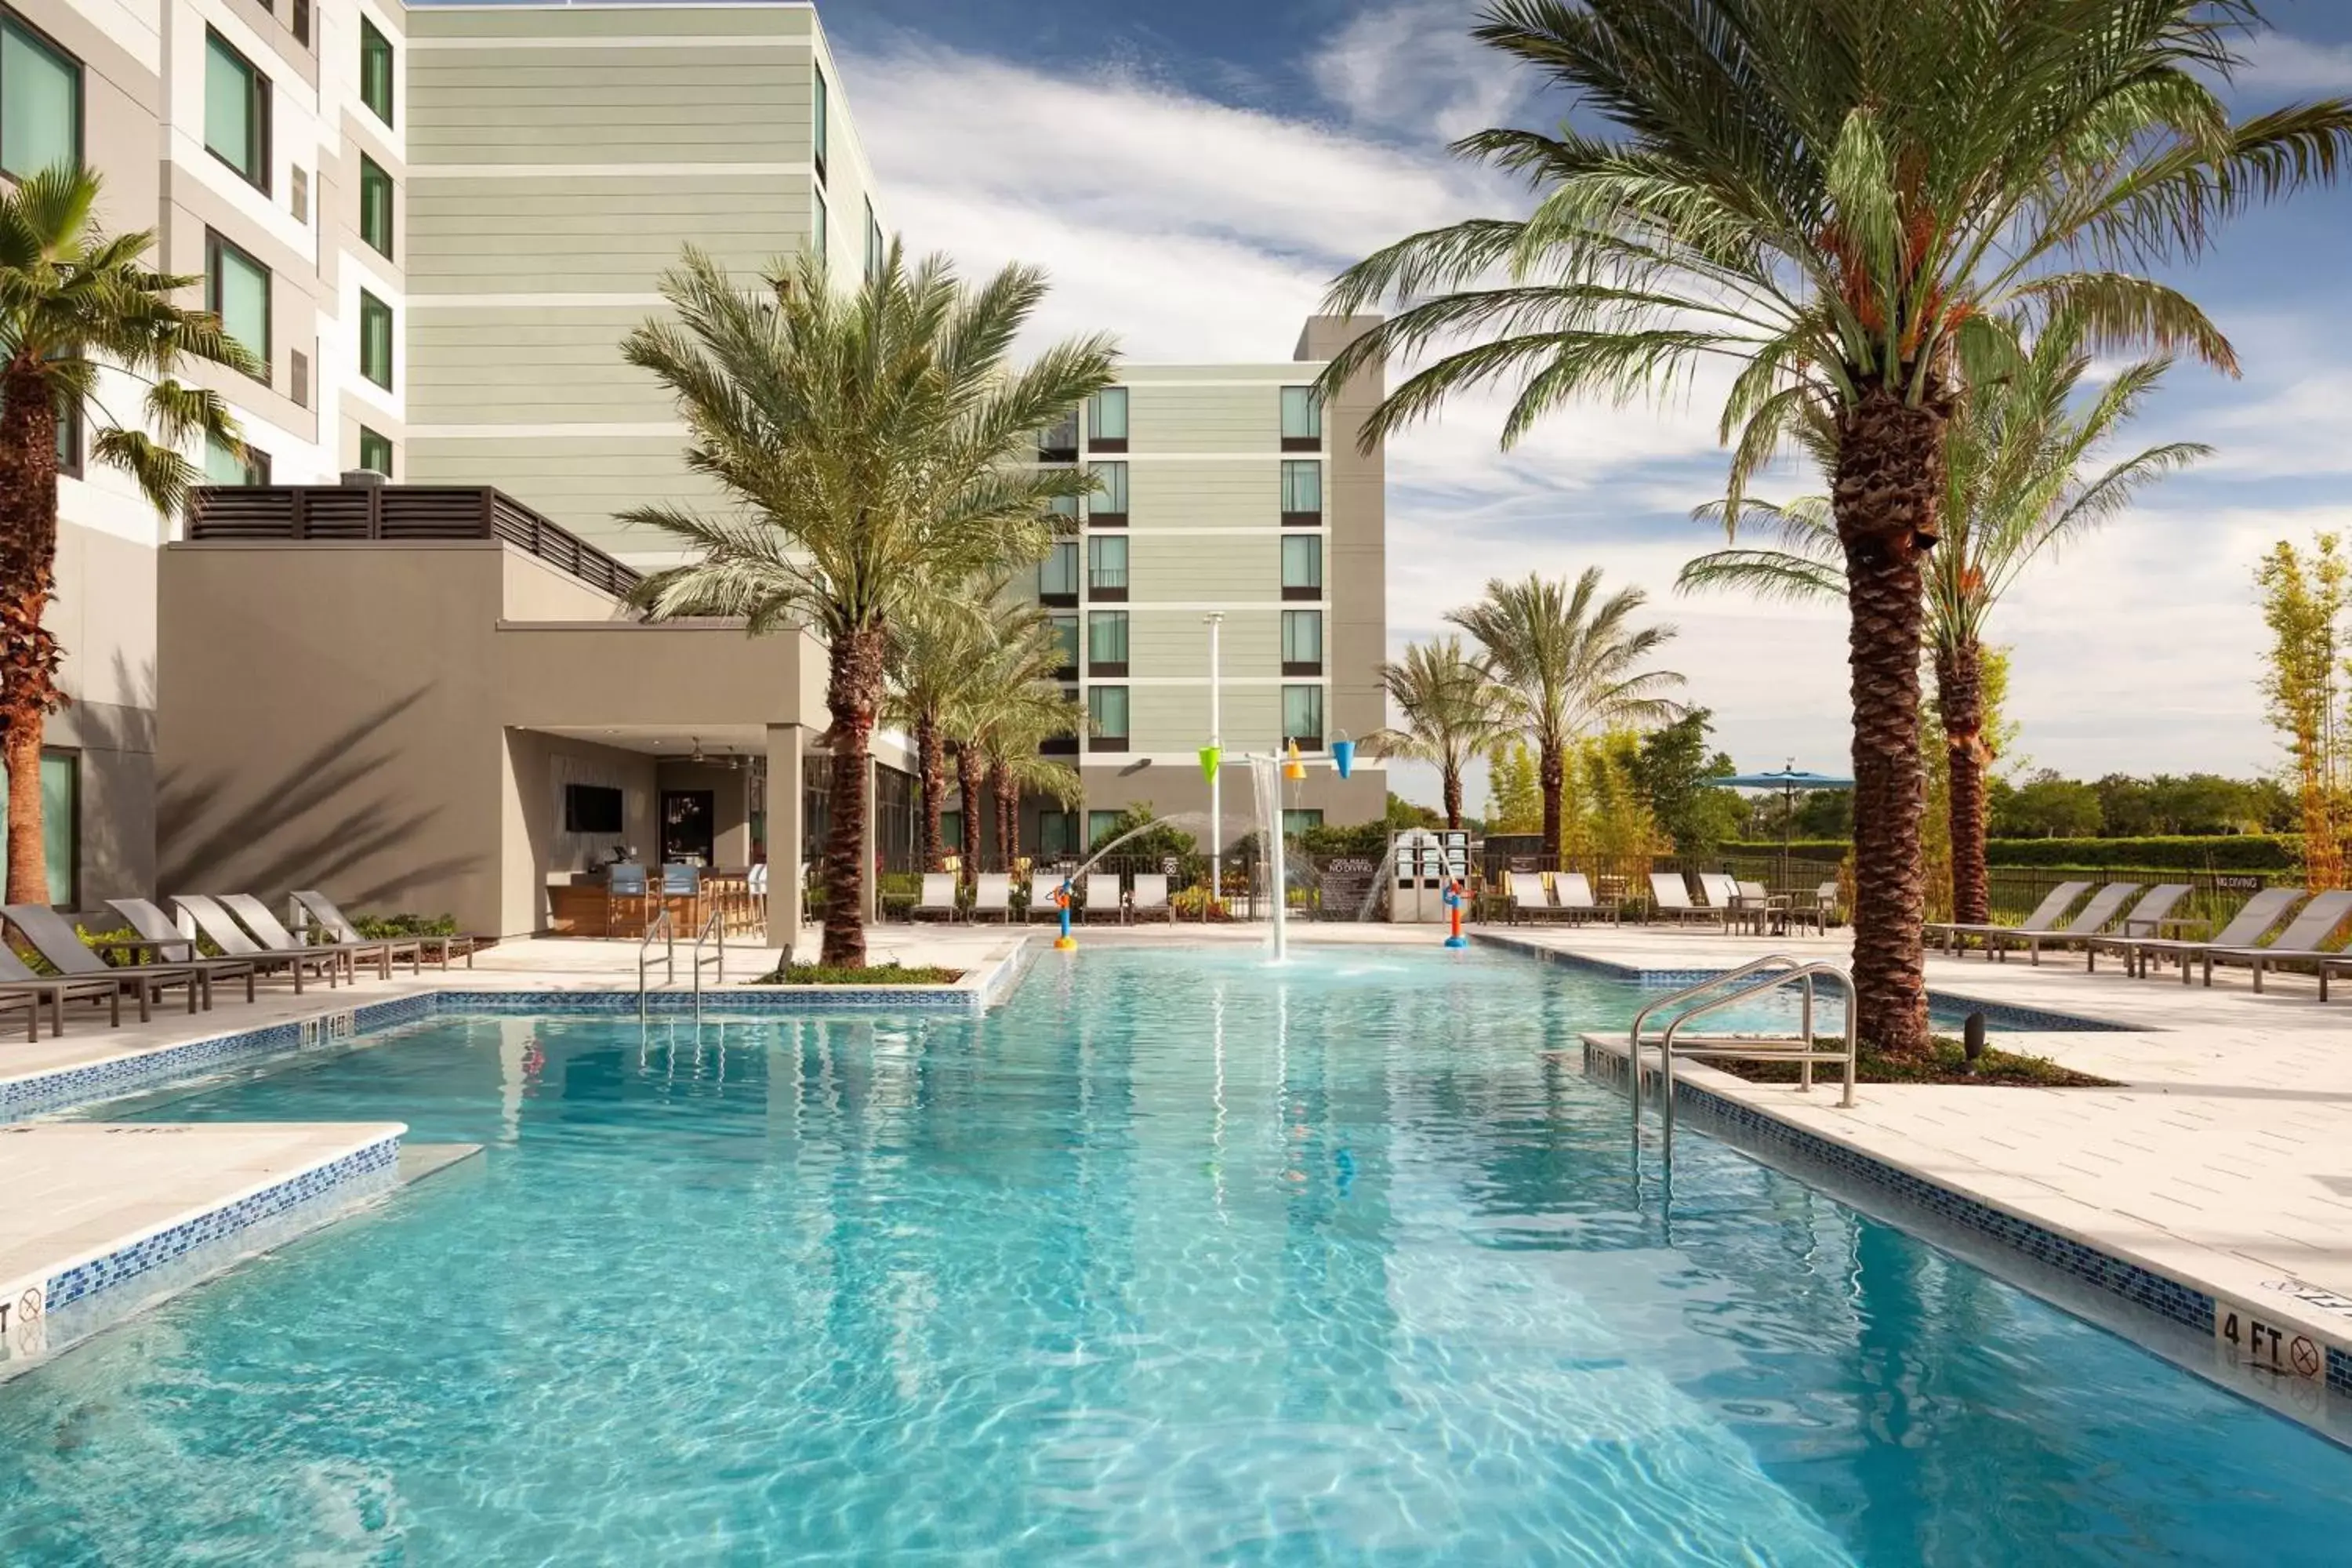 Swimming Pool in Residence Inn by Marriott Orlando at Millenia